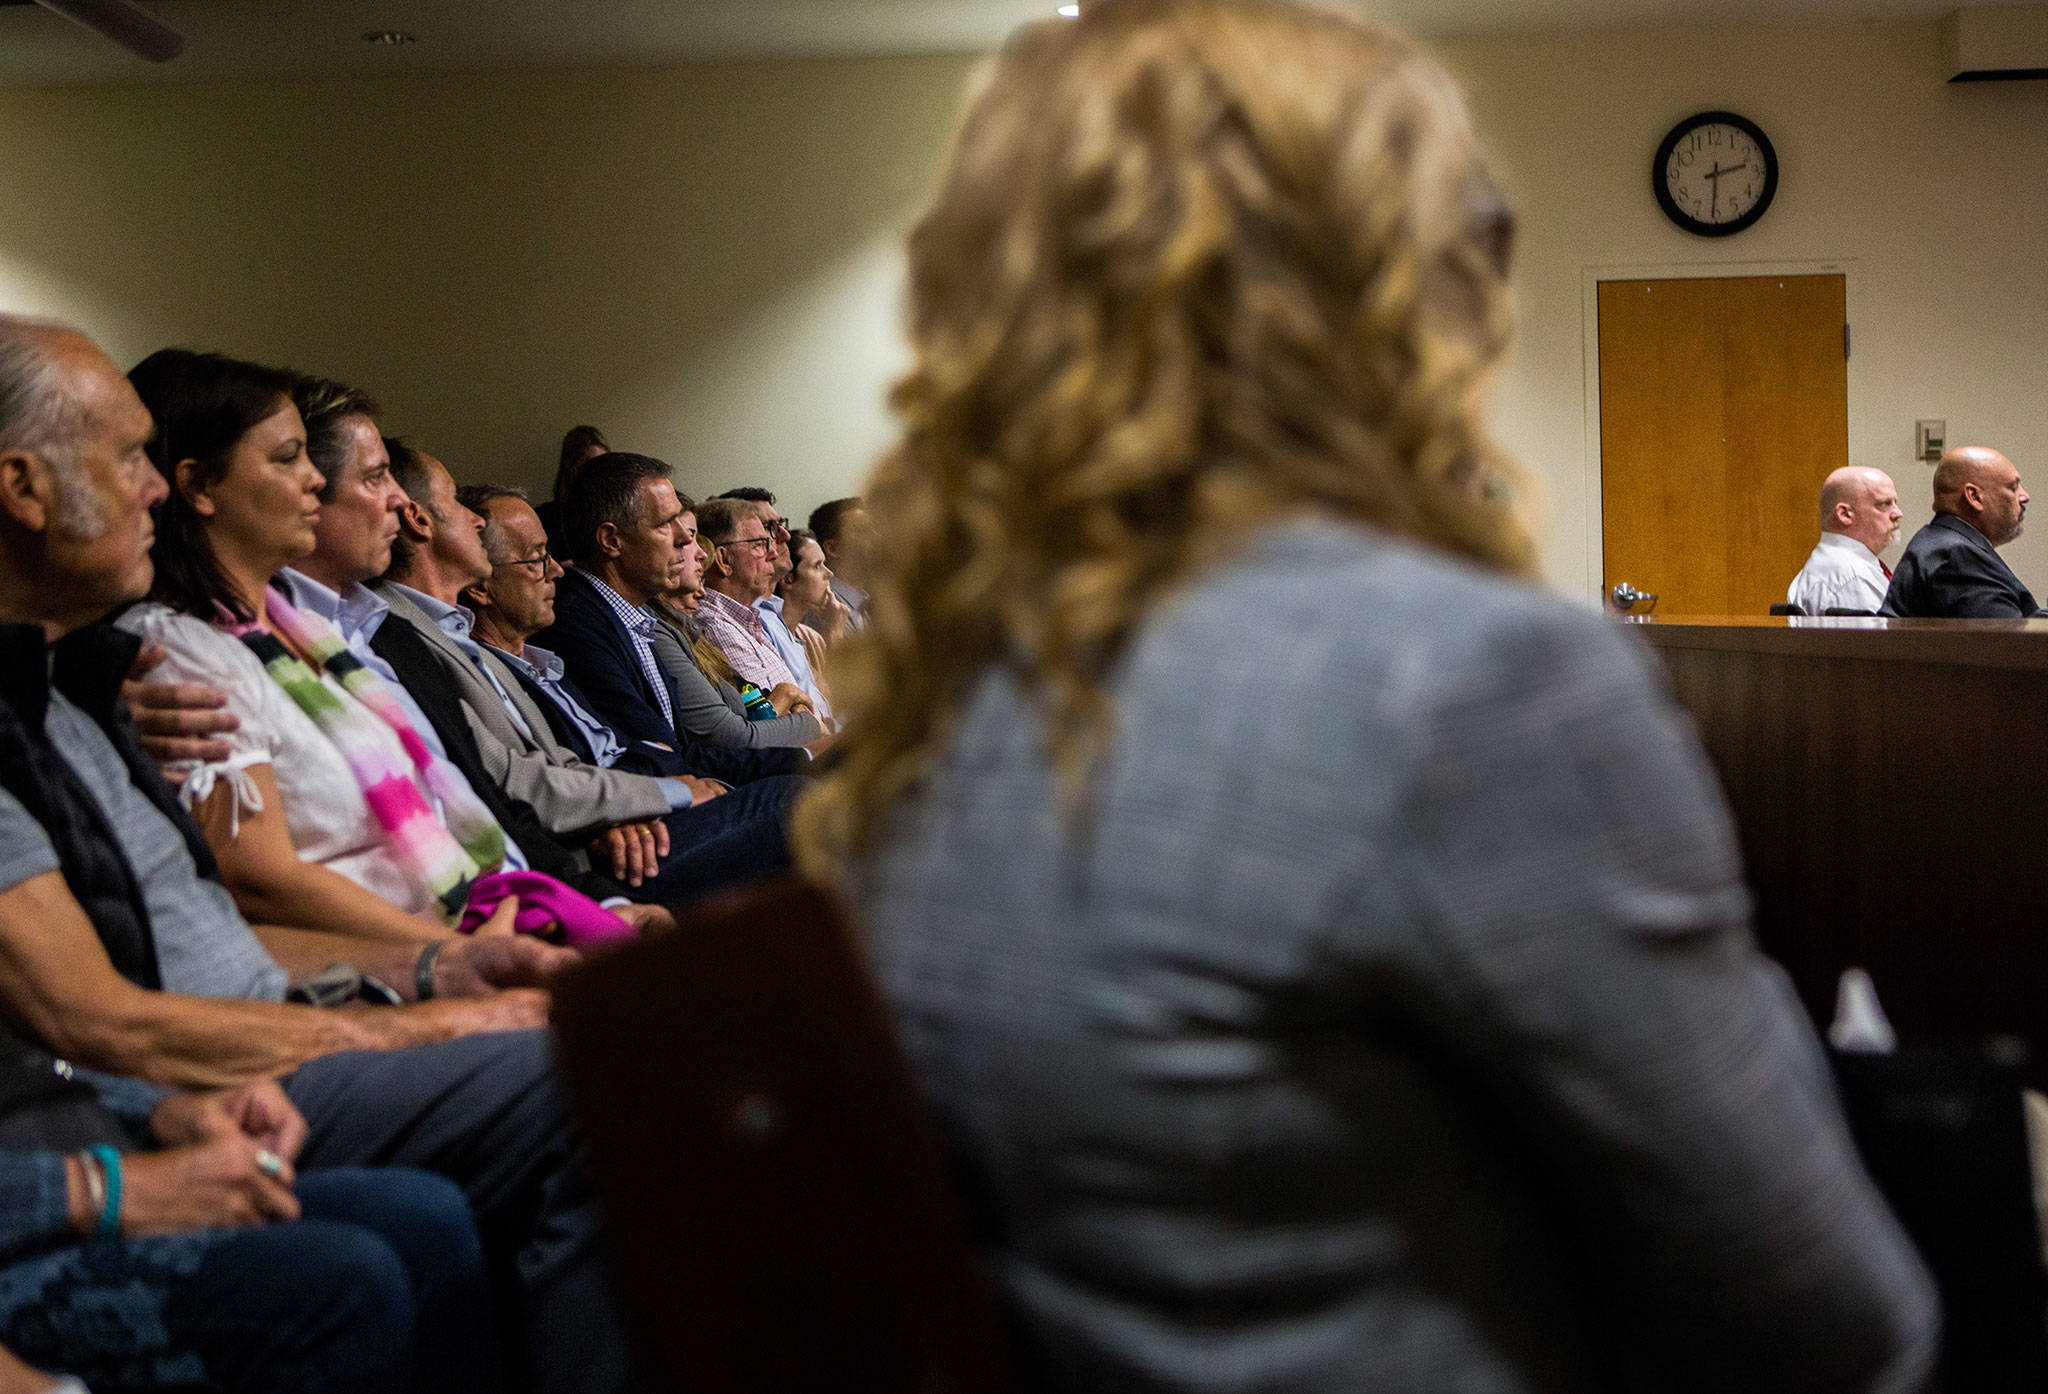 Members of Jay Cook’s and Tanya Van Cuylenborg’s families sit together in the second row of the gallery and look at the defendant William Talbott II during closing arguments Tuesday. (Olivia Vanni / The Herald)